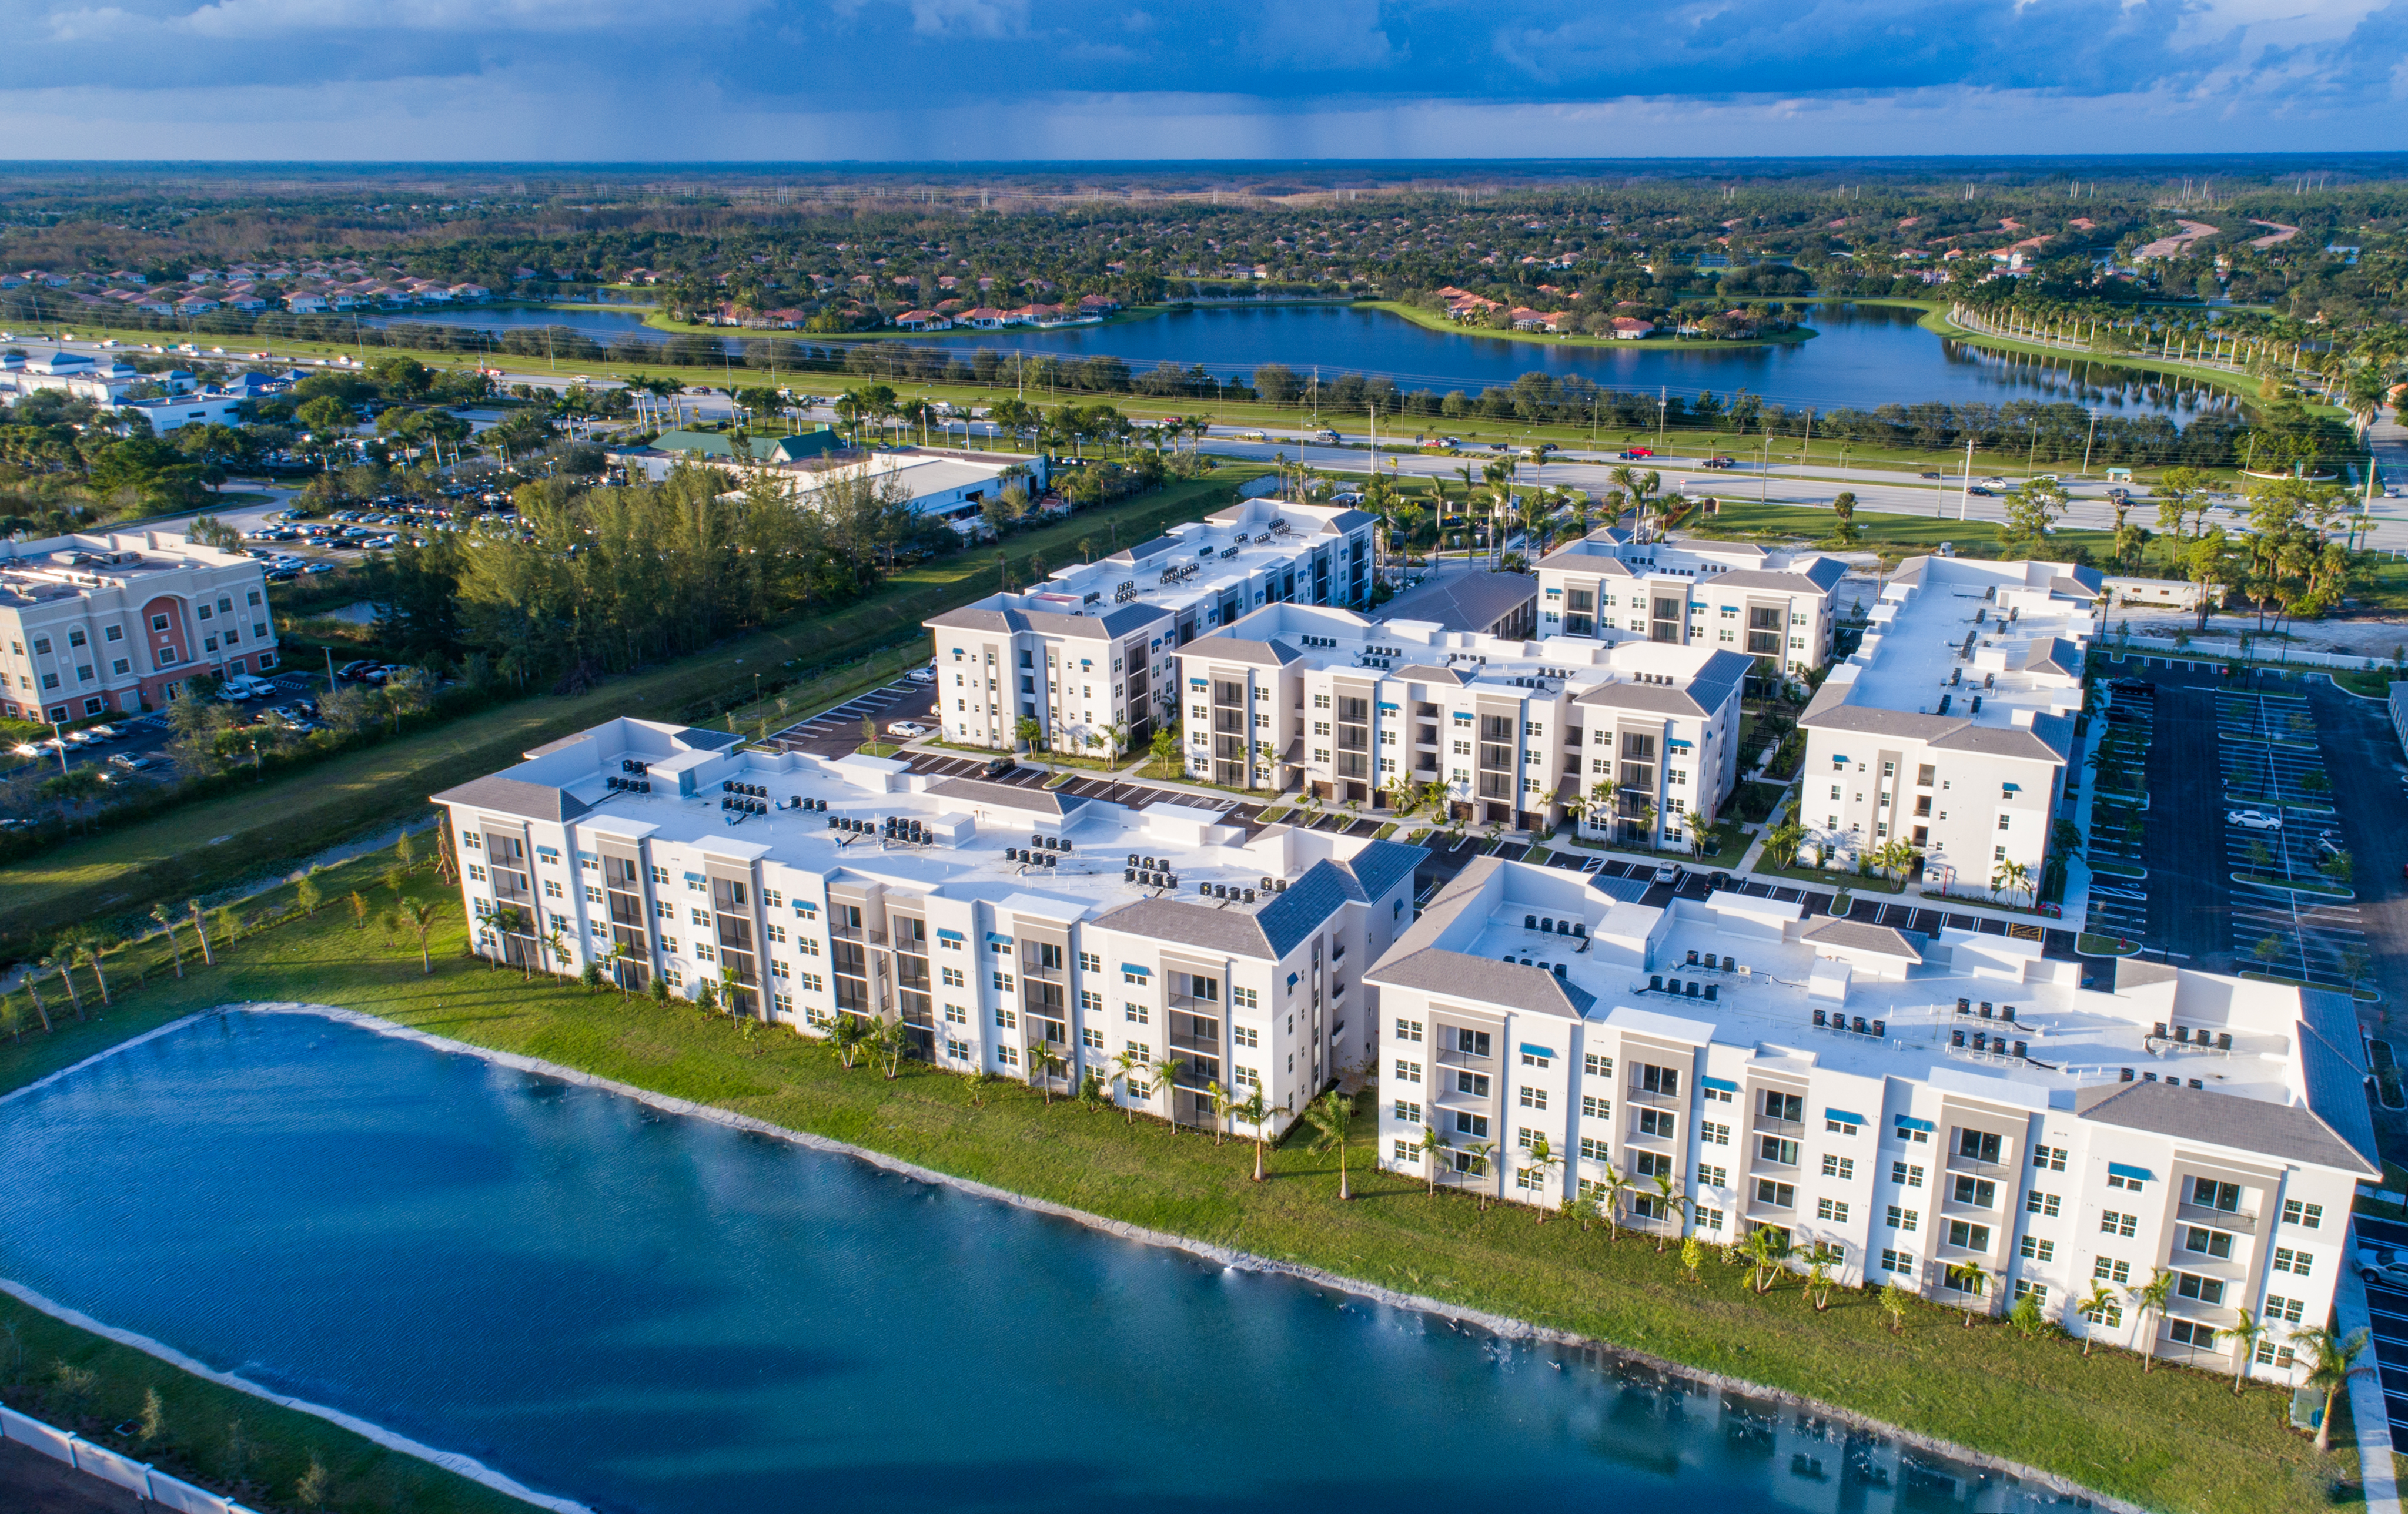 Enjoy Our Pool, Lake and Scenic Views, With View of West Palm Apartments, Lake, and Surroundings at Cottonwood West Palm Apartments